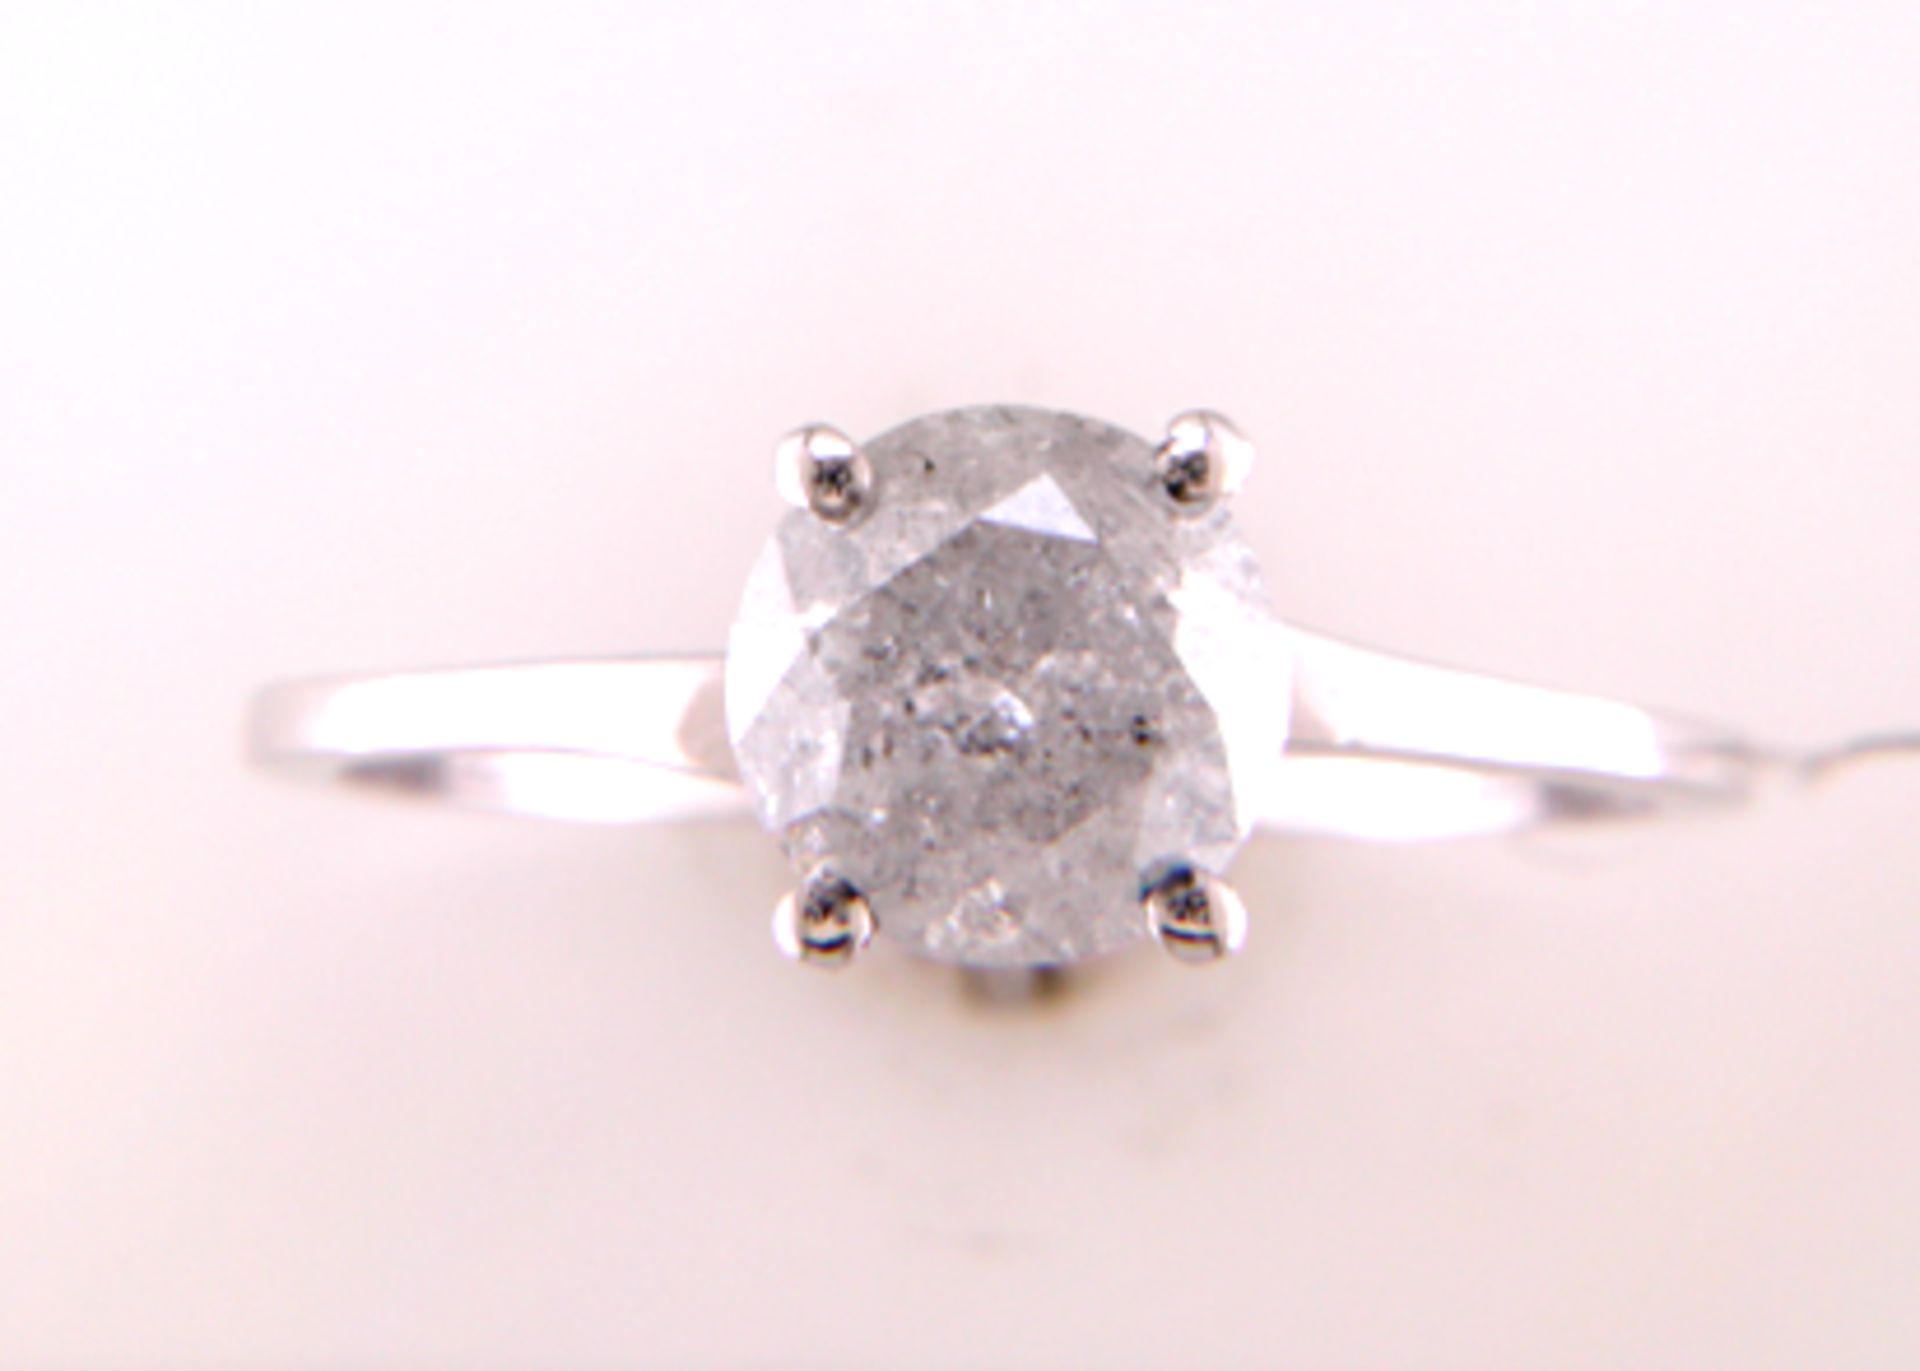 Valued by GIE £14,850.00 - 18ct White Gold Single Stone Wire Set Diamond Ring 1.27 Carats - 3102152,